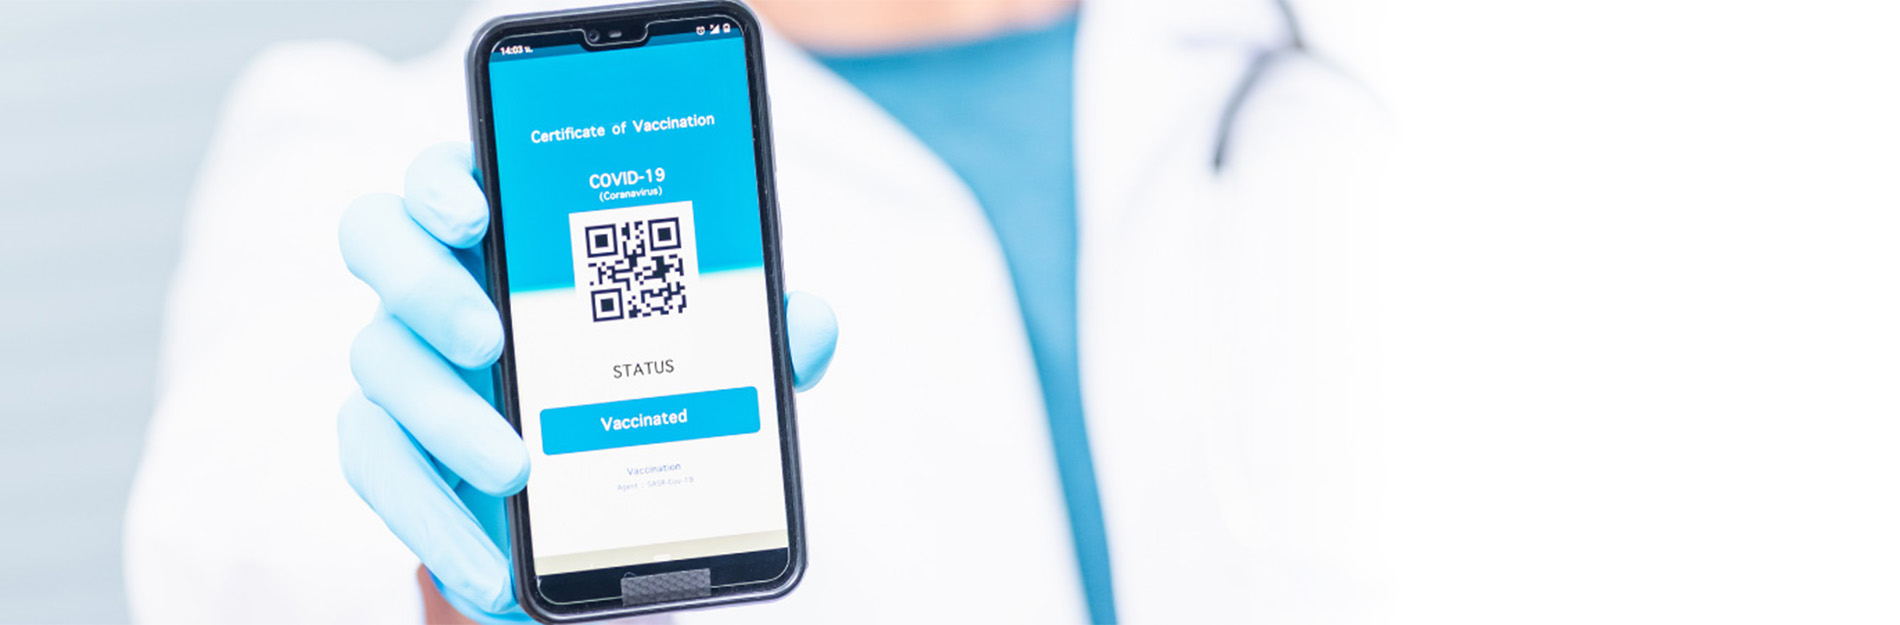 doctor holding phone with COVID QR code